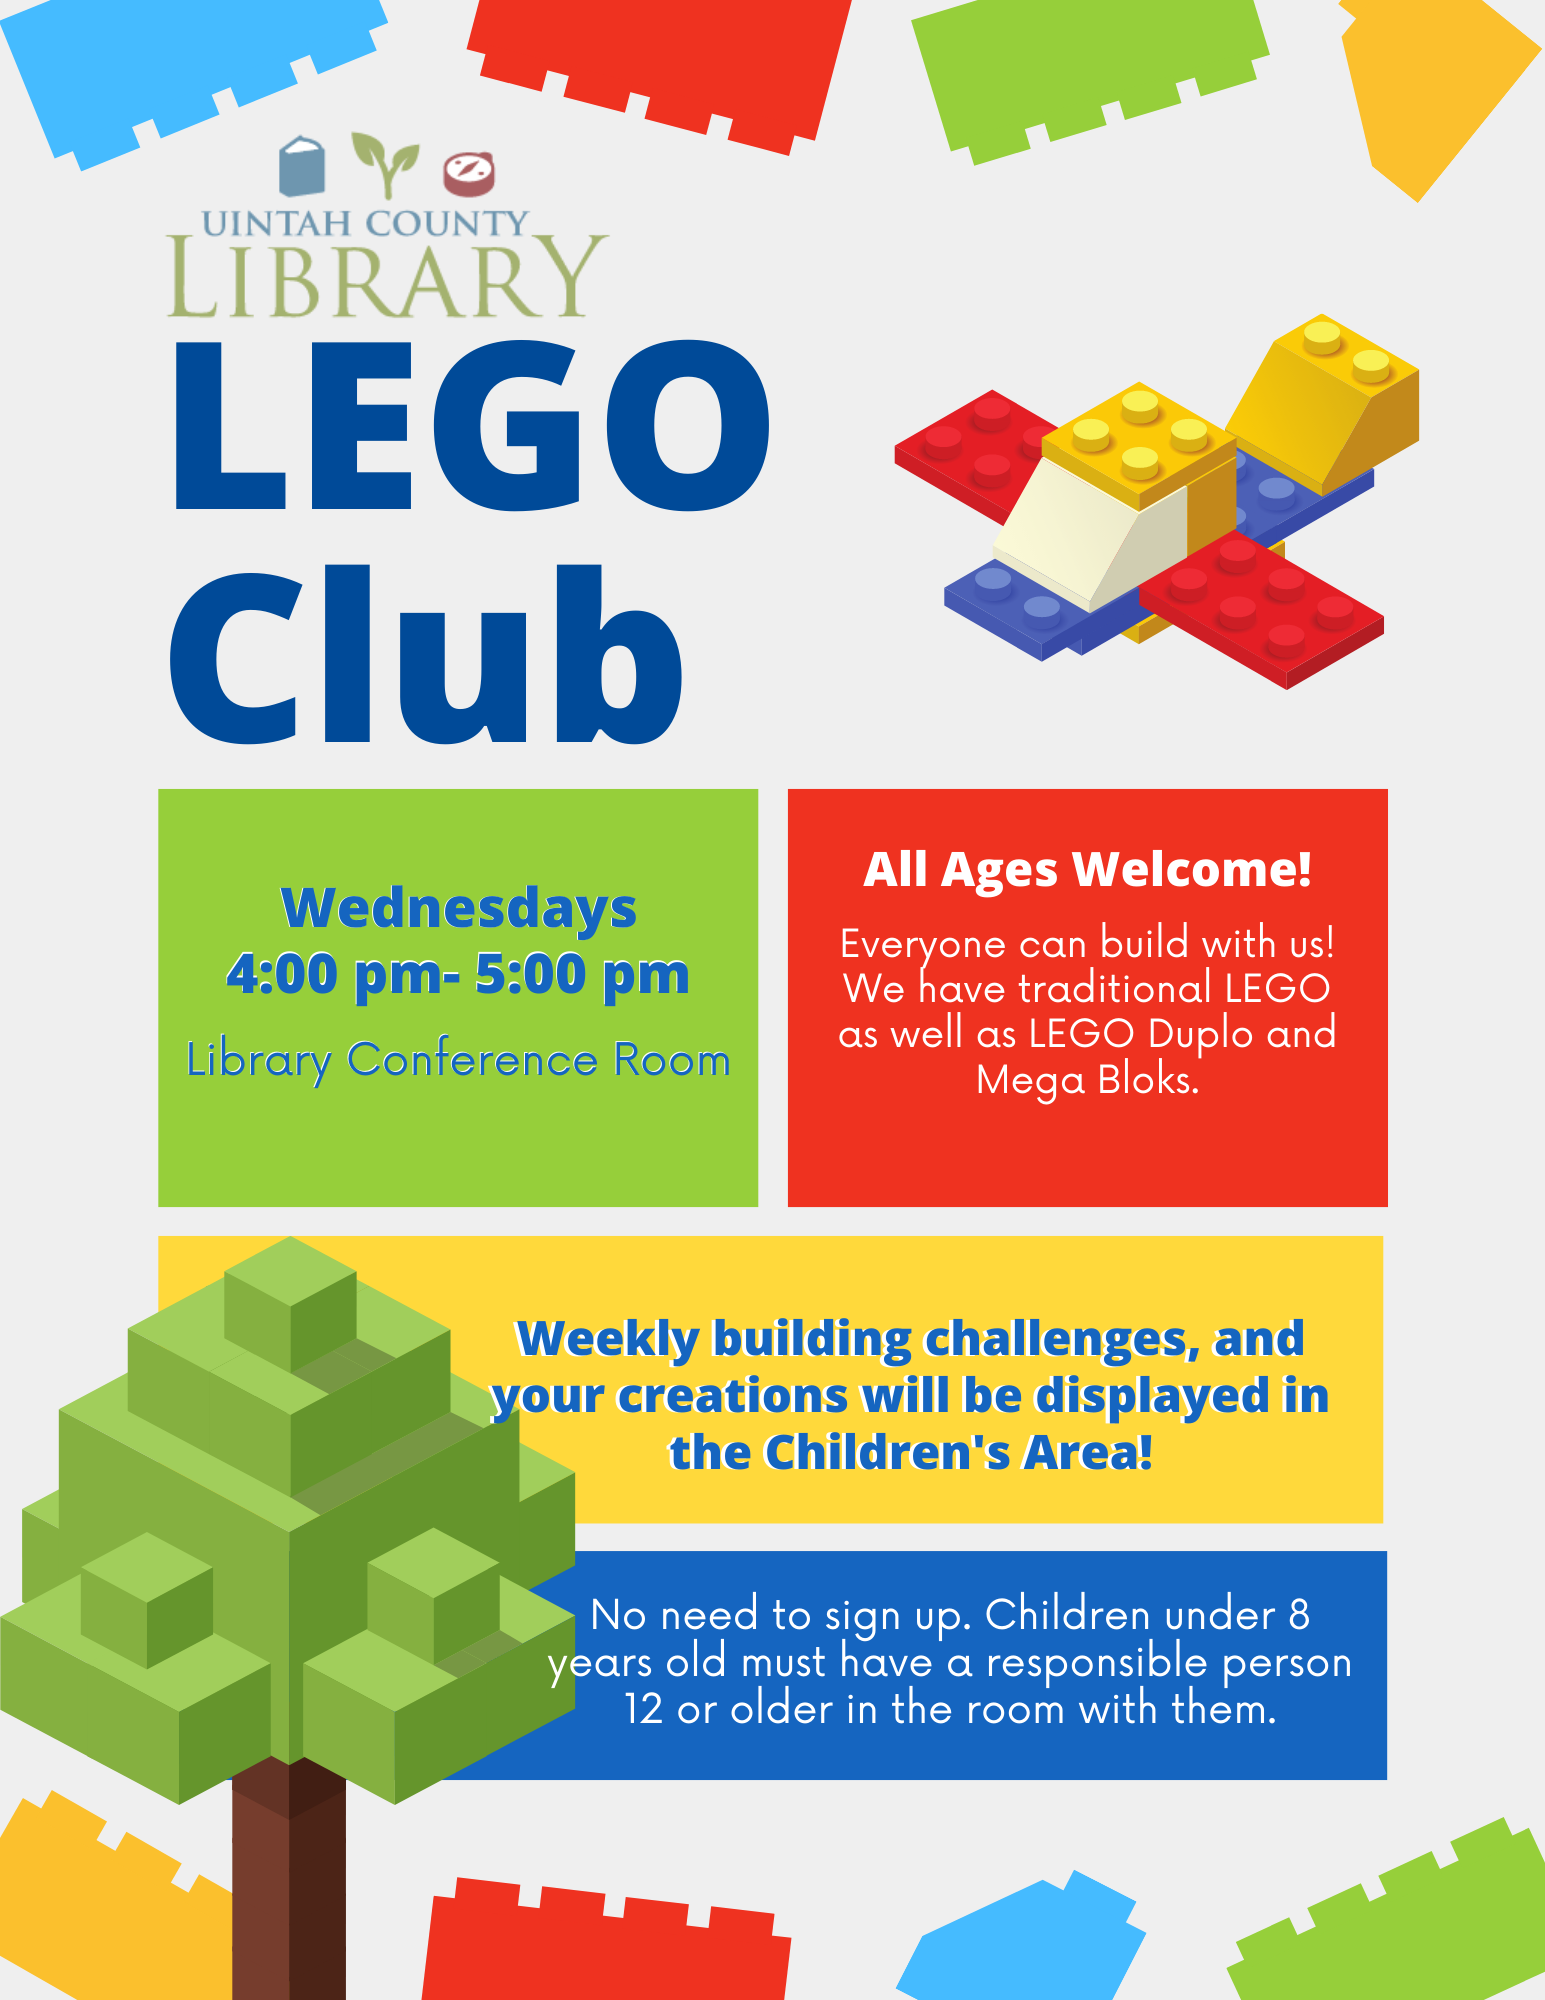 Come visit us in the large conference room on Wednesdays from 4pm - 5pm! All ages welcome! Everyone can build with us! We have traditional LEGO as well as LEGO Duplo and Mega Bloks.  Weekly building challenges, and your creations will be displayed in the Children's Area!  No need to sign up. Children 8 years and under must have a responsible person 14 or older with them.